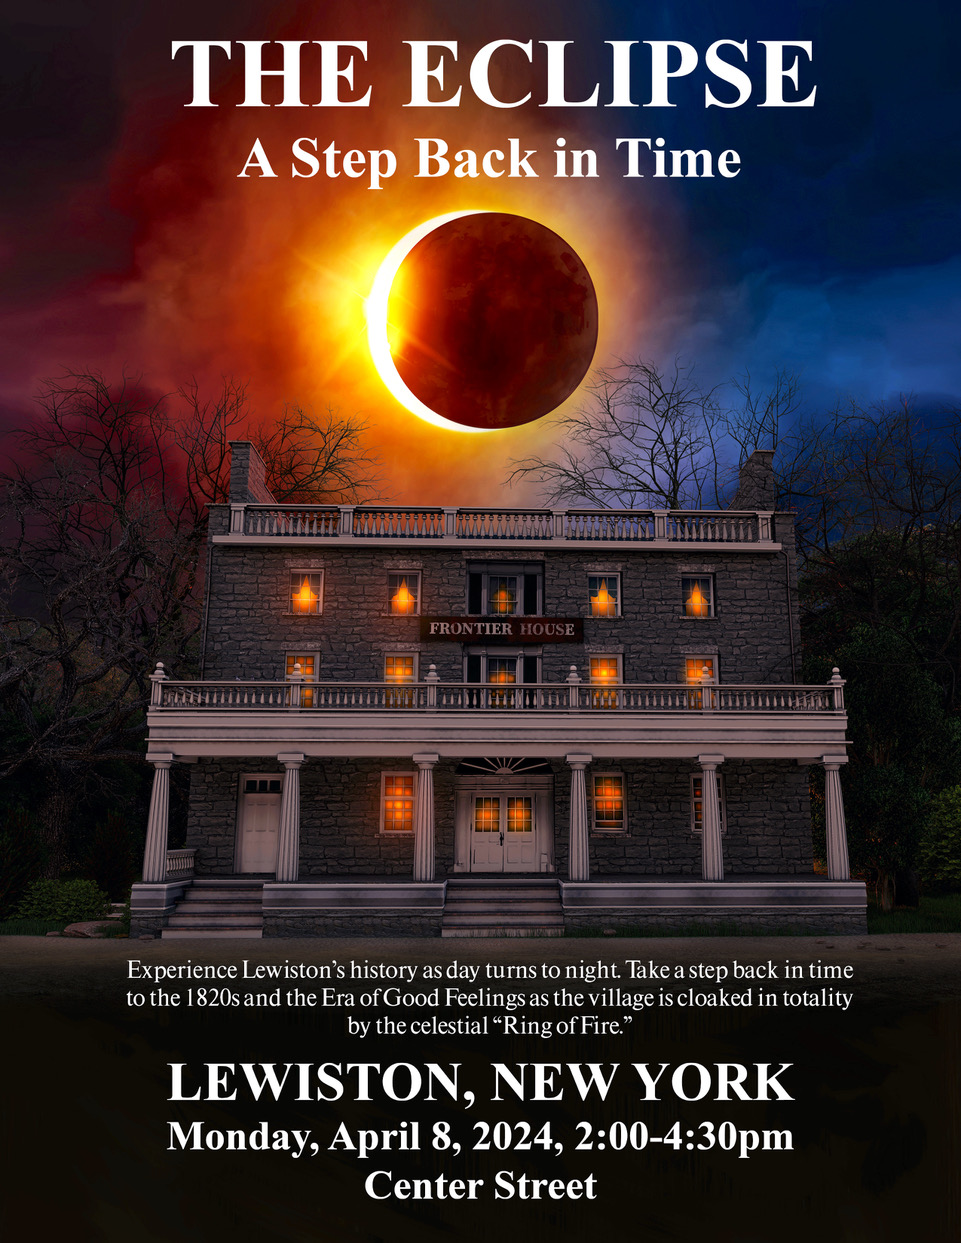 `The Eclipse: A Step Back in Time` in Lewiston. (Image courtesy of Lee Simonson)